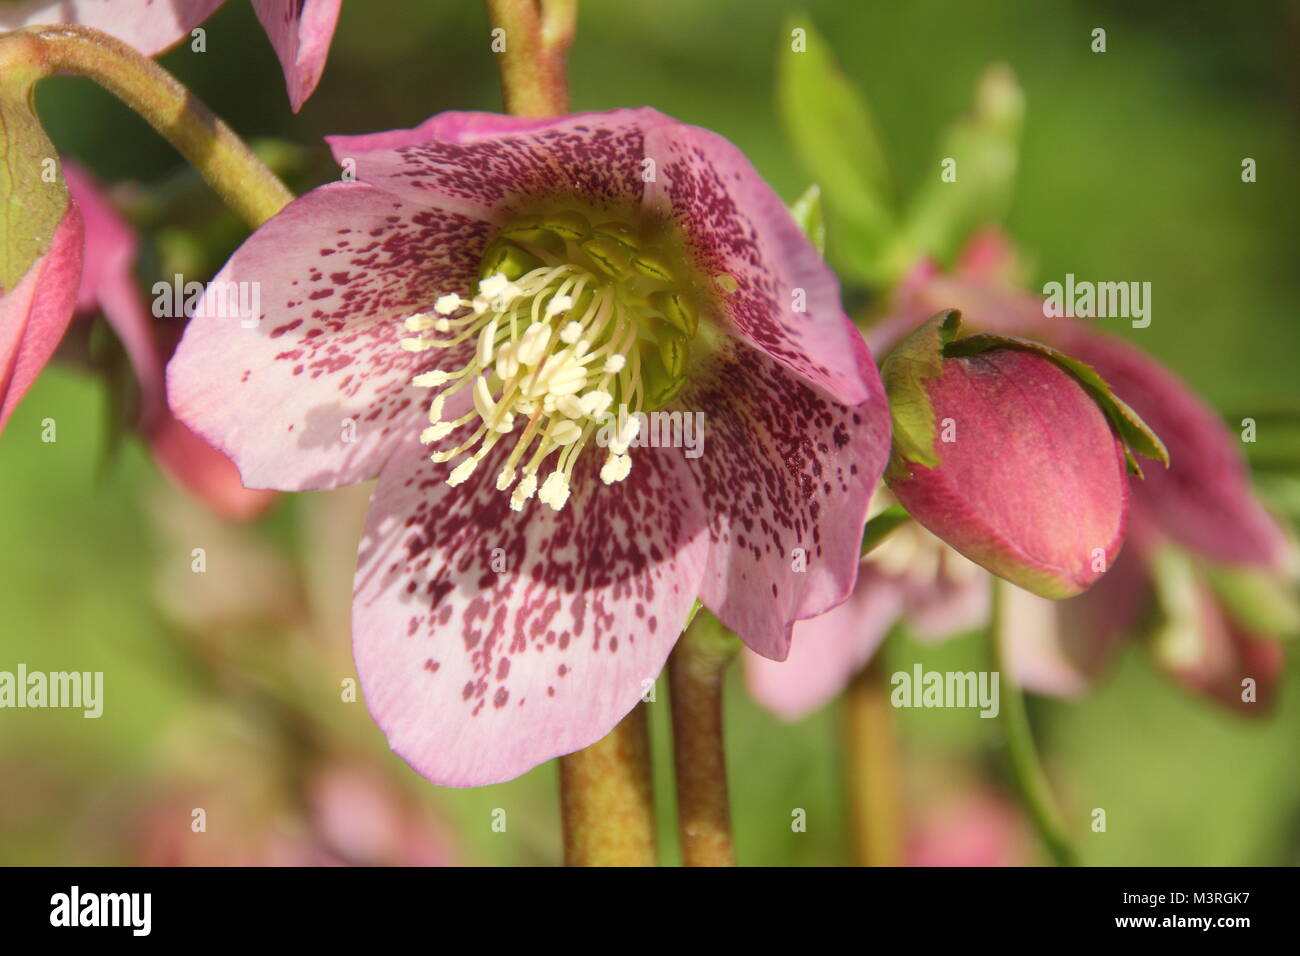 Helleborus x hydridus, a hybrid hellebore with speckl;ed petals, in flower in a an English garden in early February, UK Stock Photo